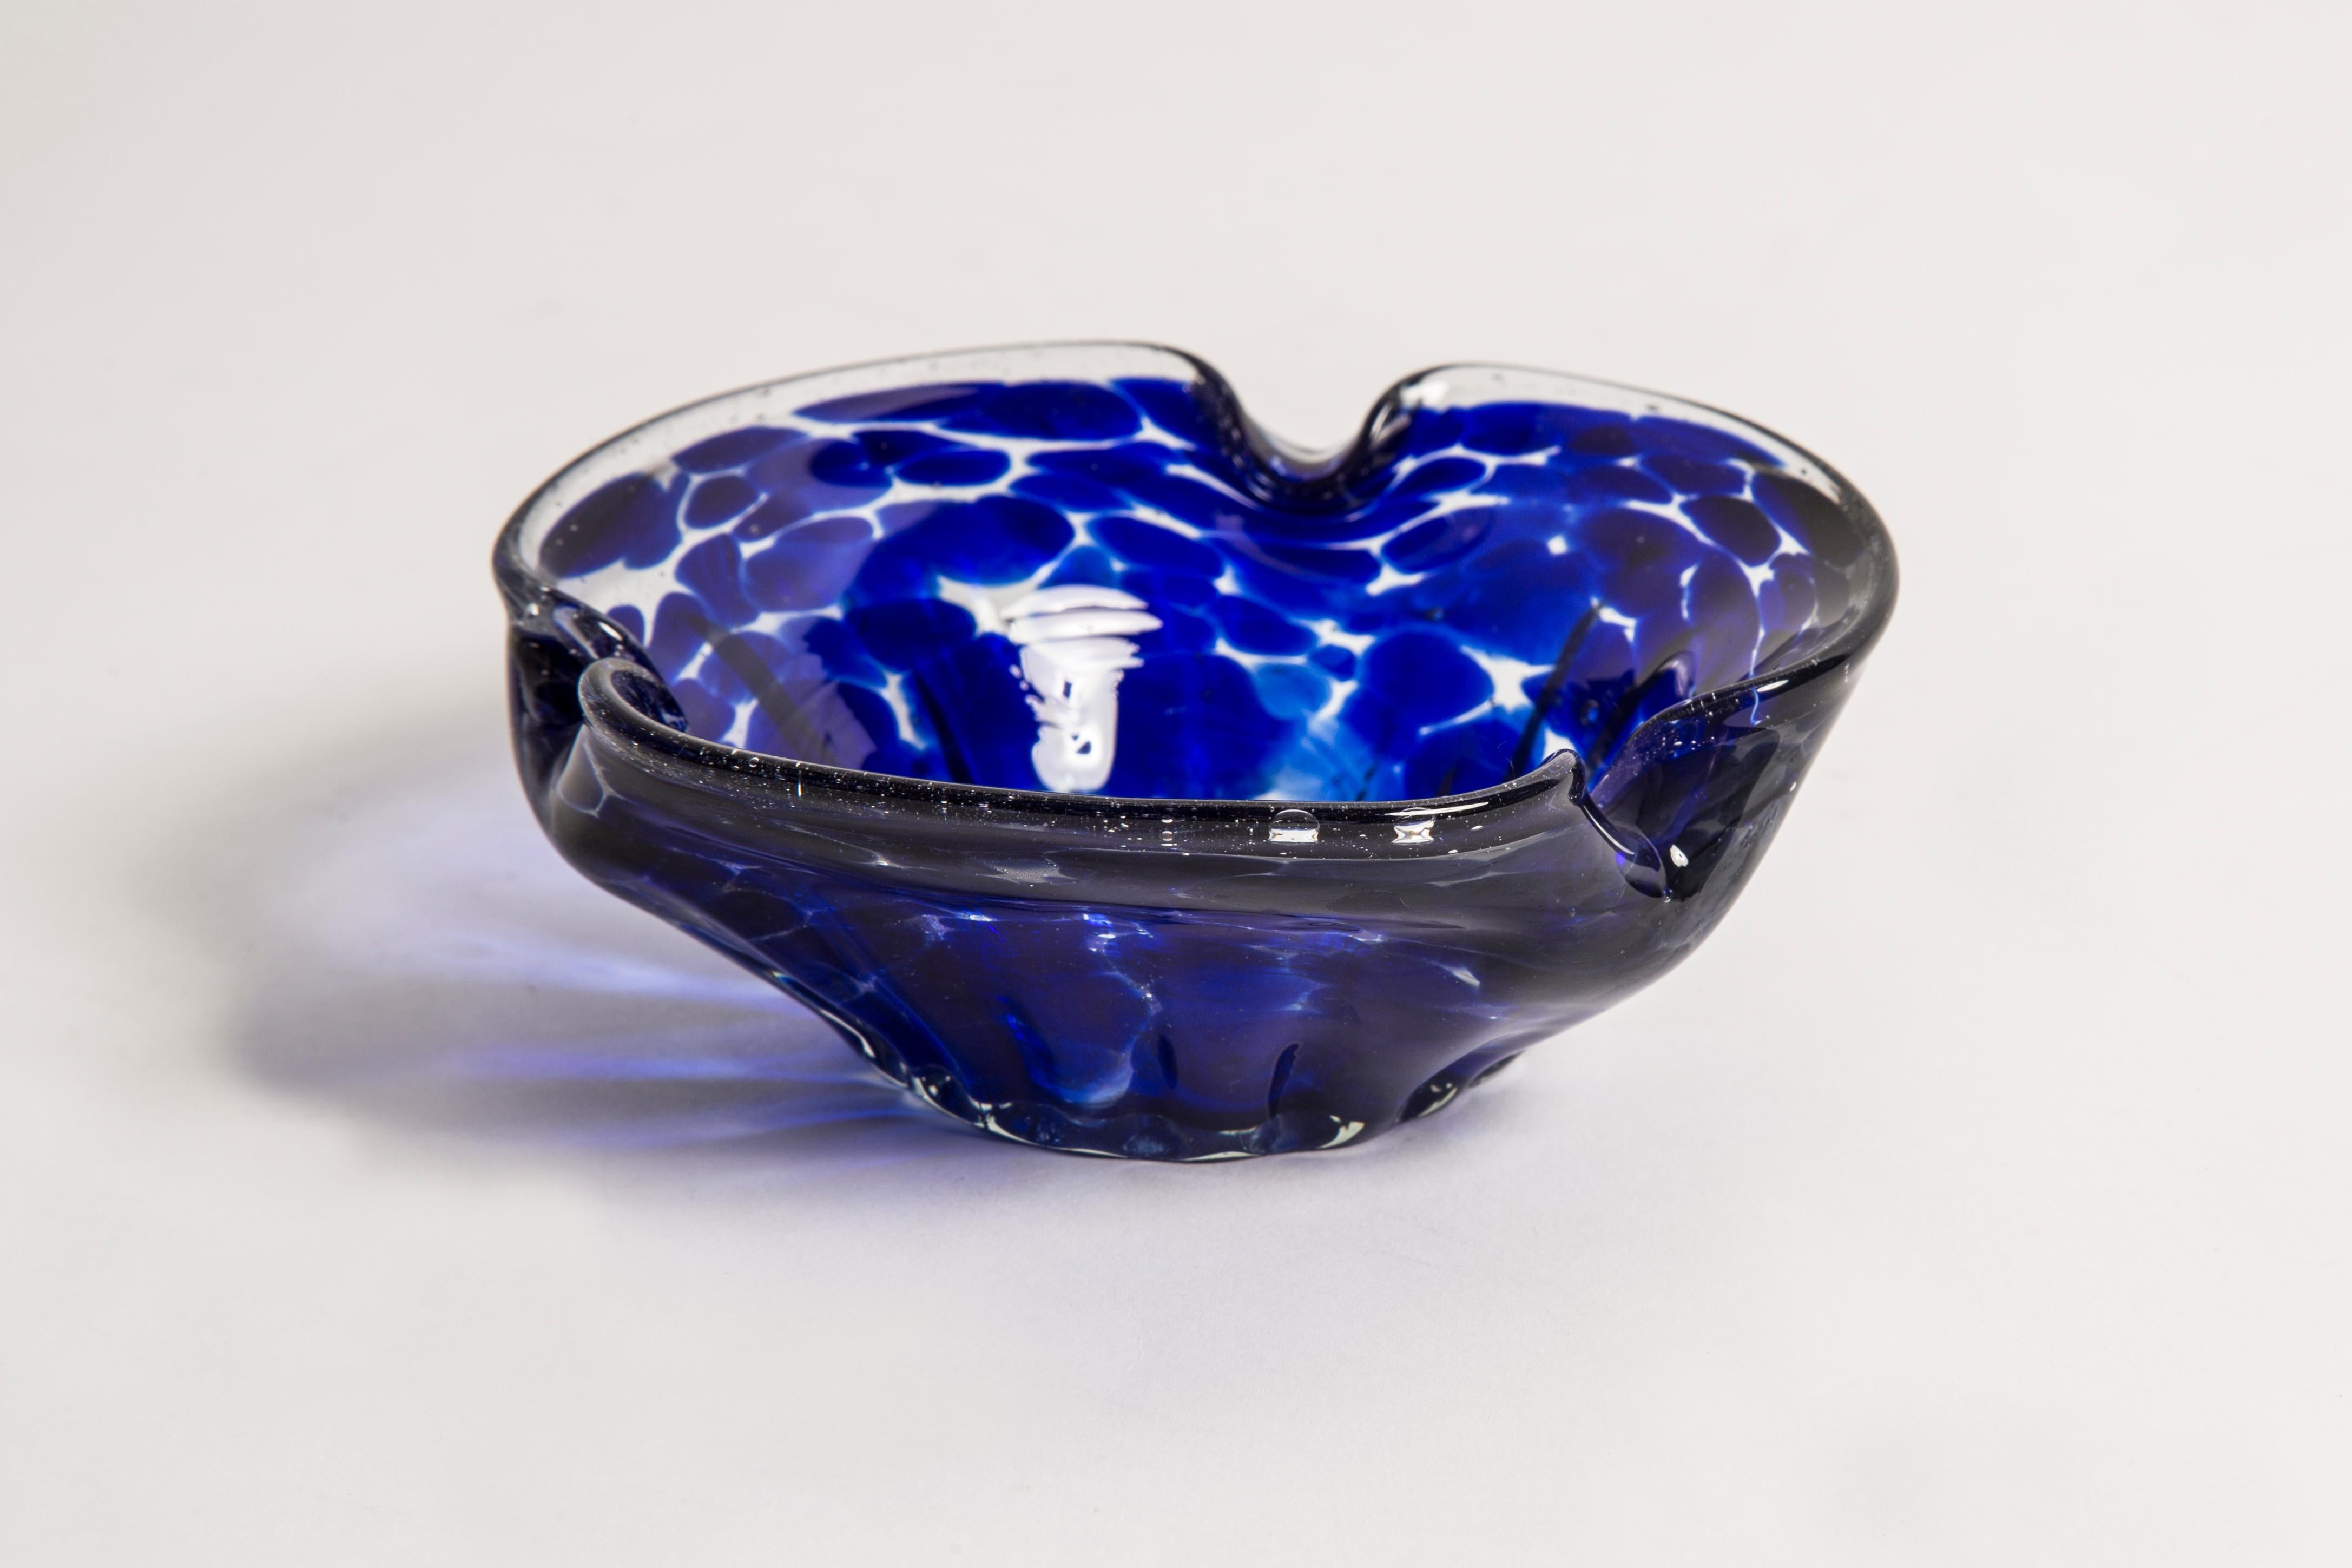 20th Century Midcentury Murano Blue Glass Bowl Ashtray Element, Italy, 1970s For Sale